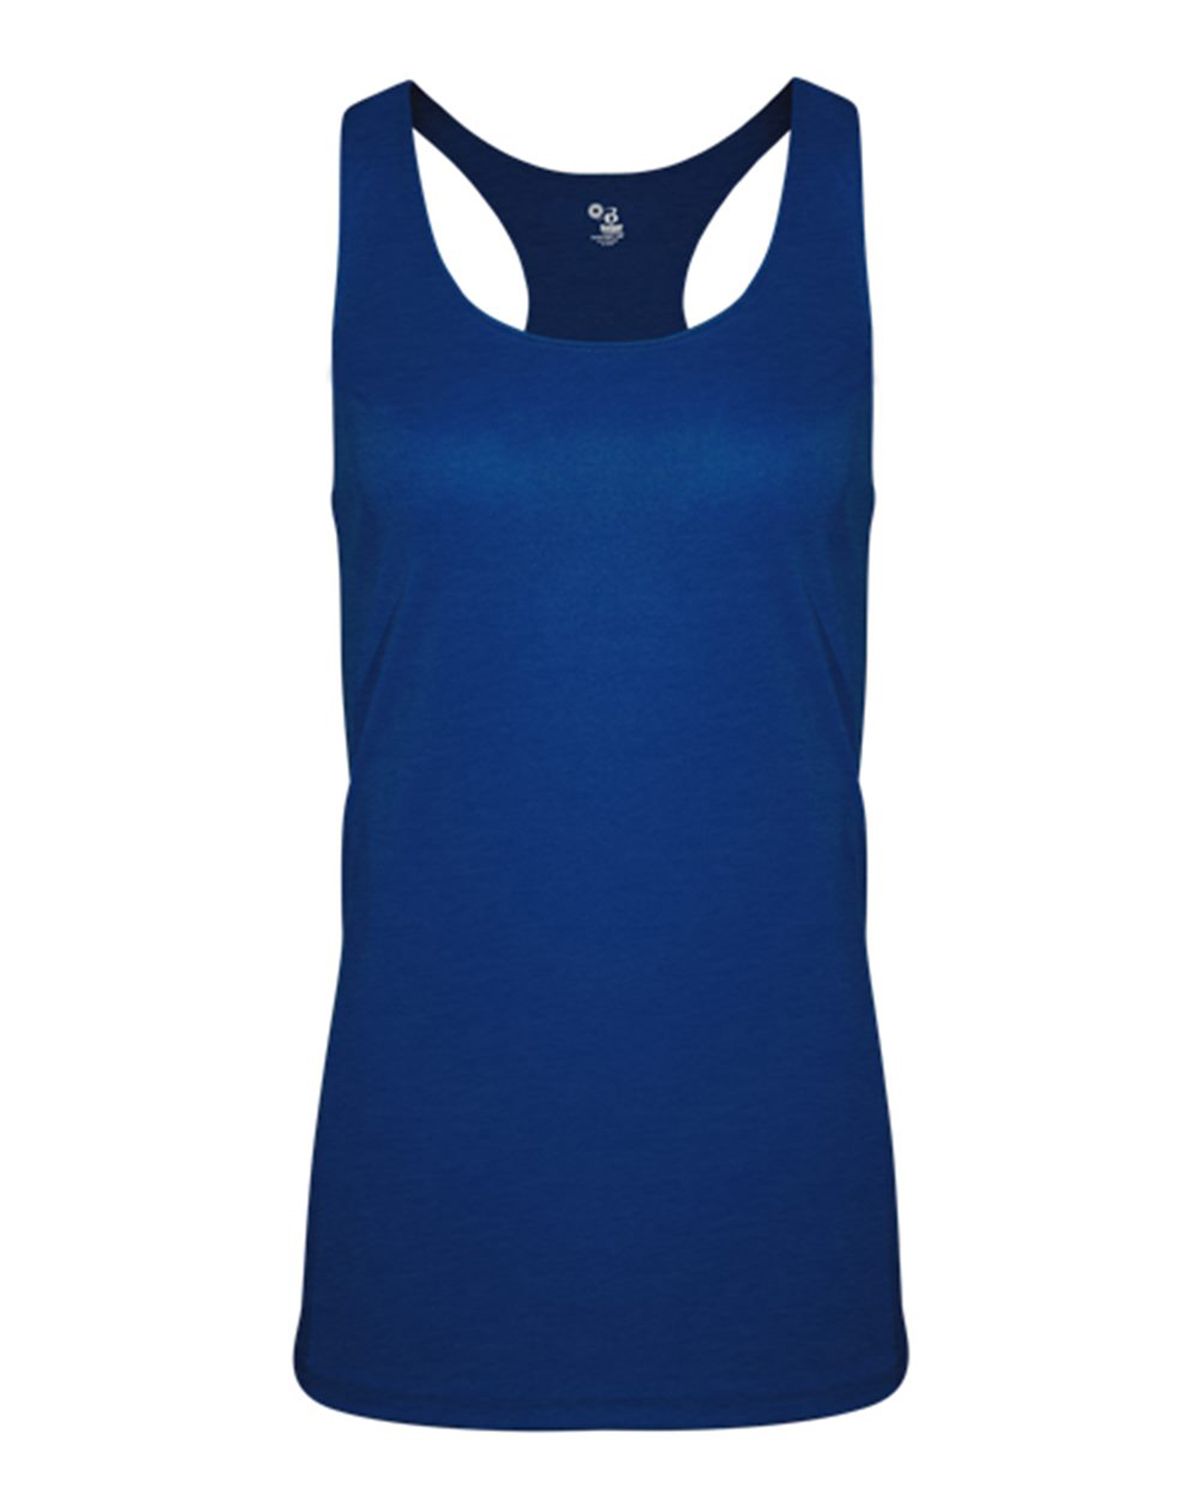 Badger 4966 Women's Triblend Racerback - Free Shipping Available